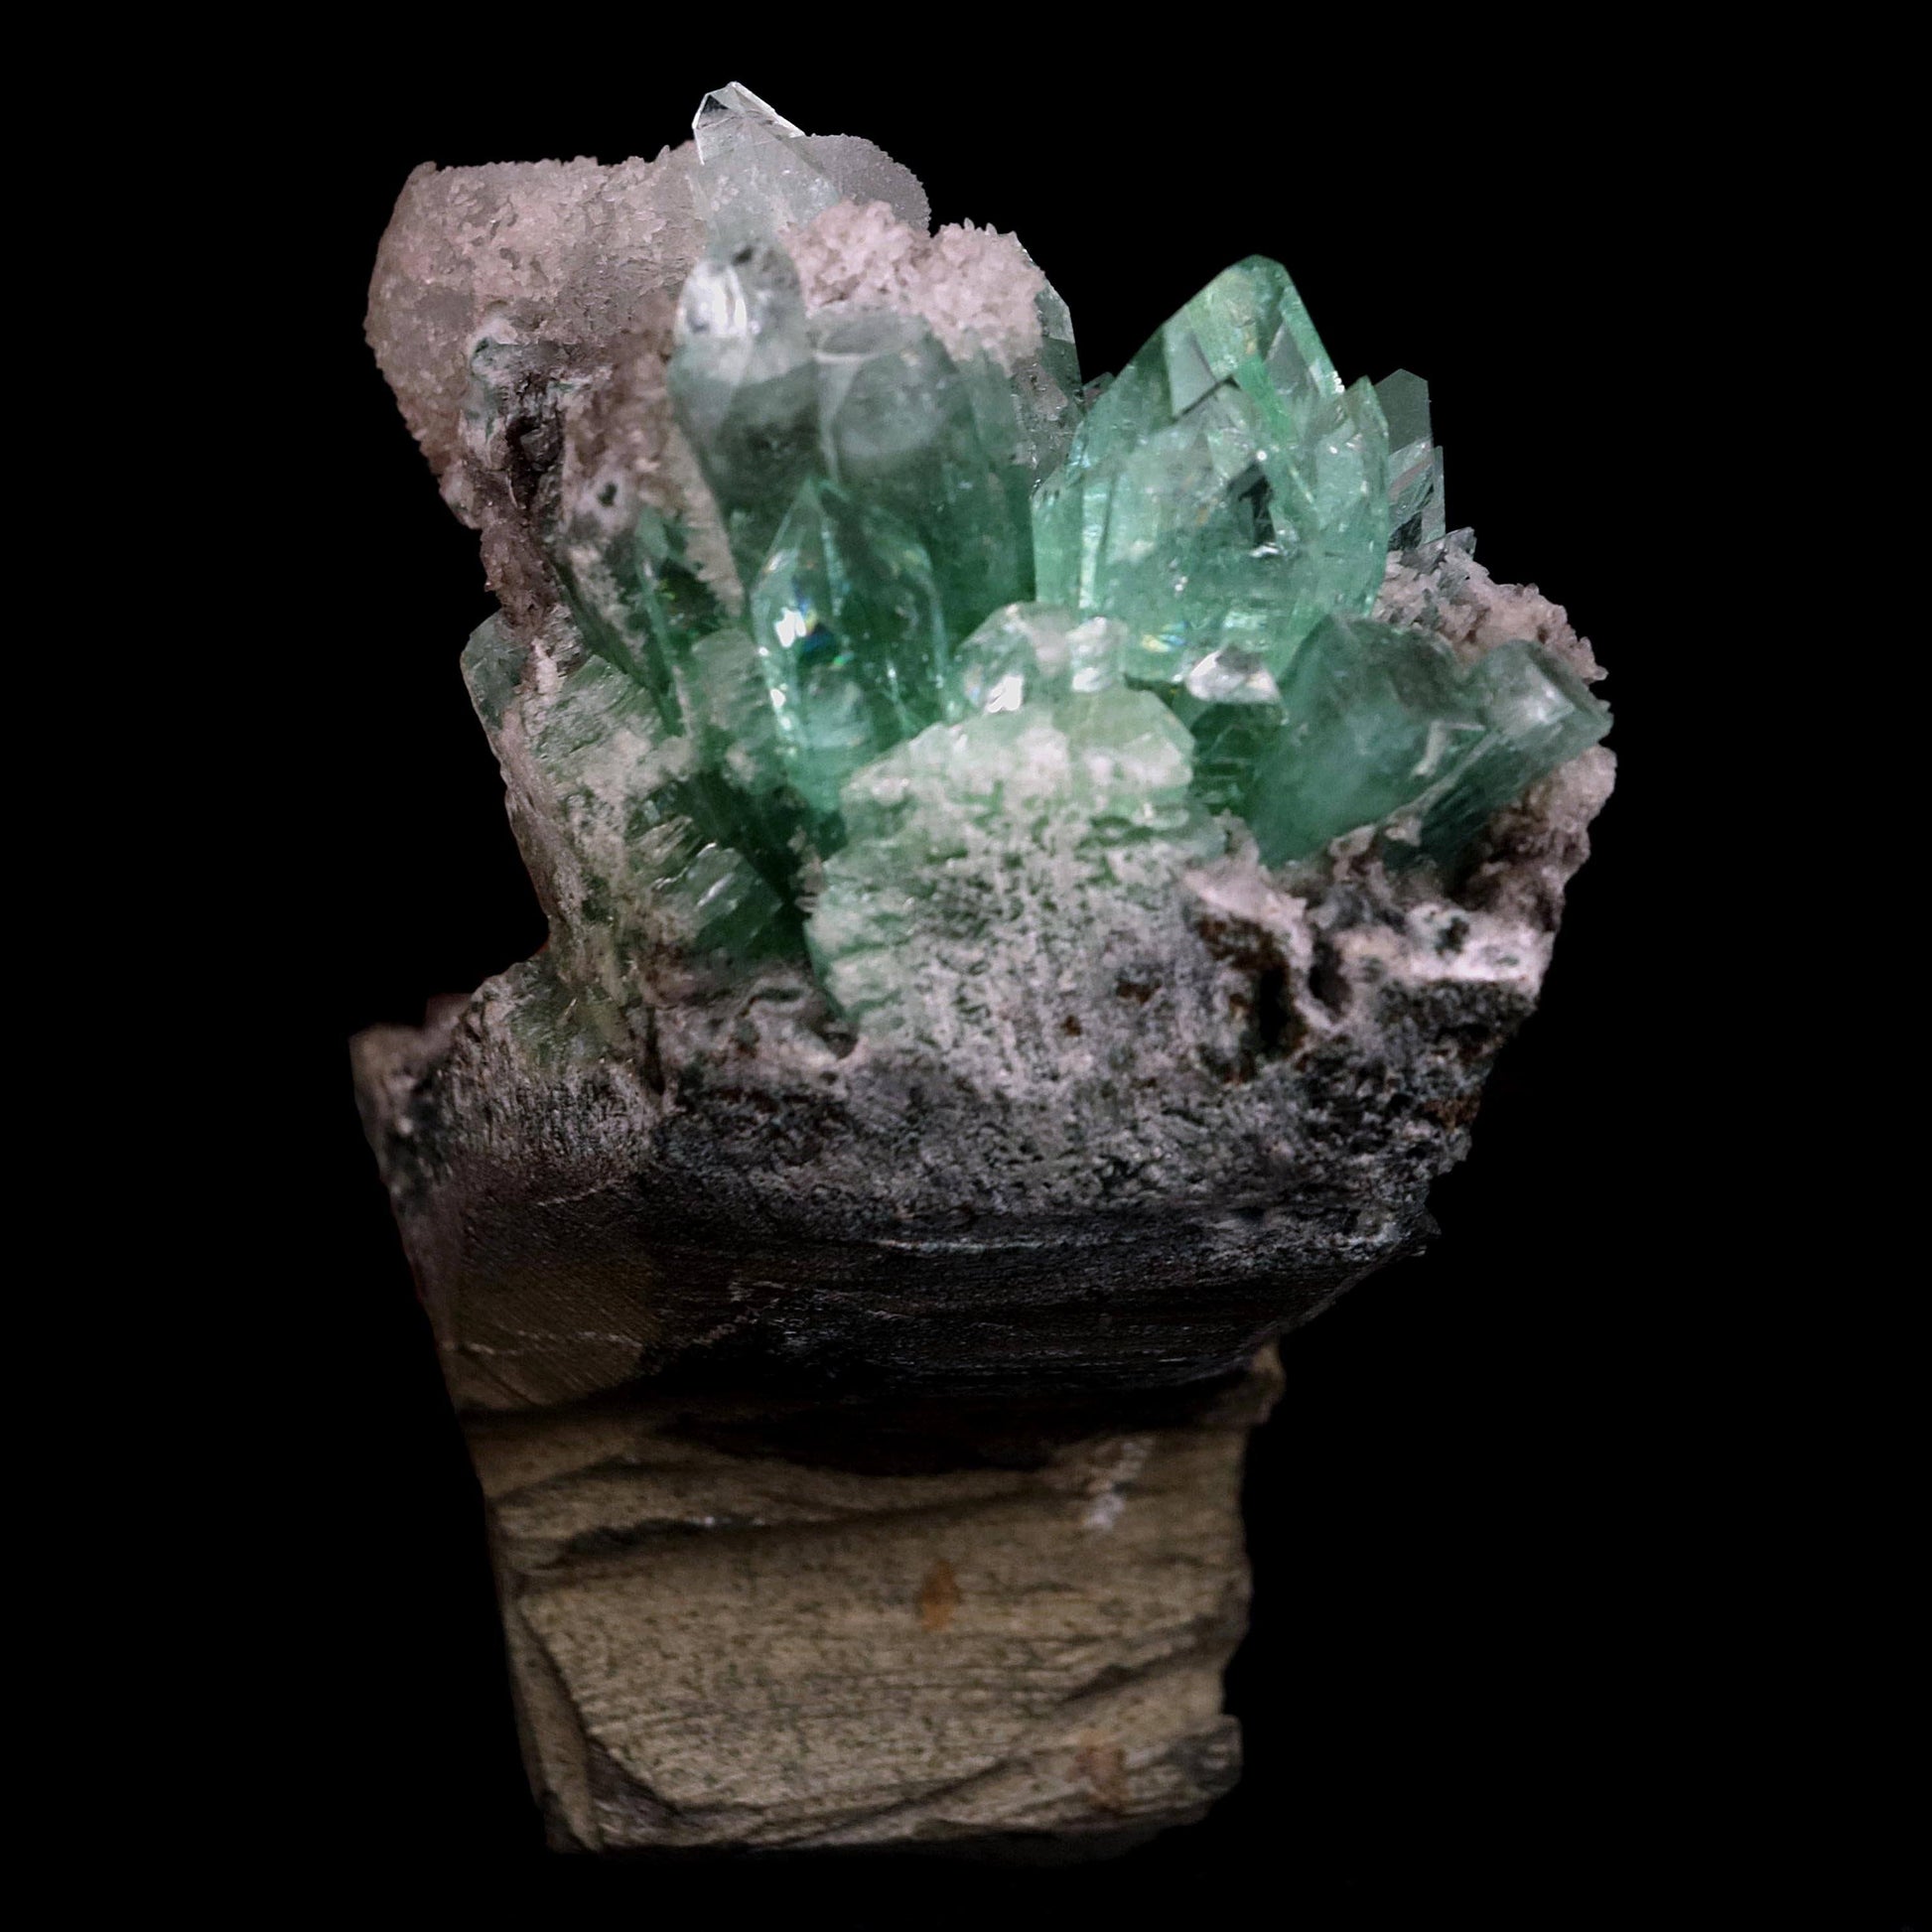 Green Apophyllite with Coated Calcite on Black Chalcedony Natural Mine… https://www.superbminerals.us/products/green-apophyllite-with-coated-calcite-on-black-chalcedony-natural-mineral-specimen-b-4600 Features:An exceptionally sculptural and impressive large combination zeolite specimen from Aurangabad. The very well prepared deep triangular vug in basalt matrix is lined with sparkly, bubbly, drusy gray chalcedony. The striking and aesthetic mound in the middle hosts pearlescent